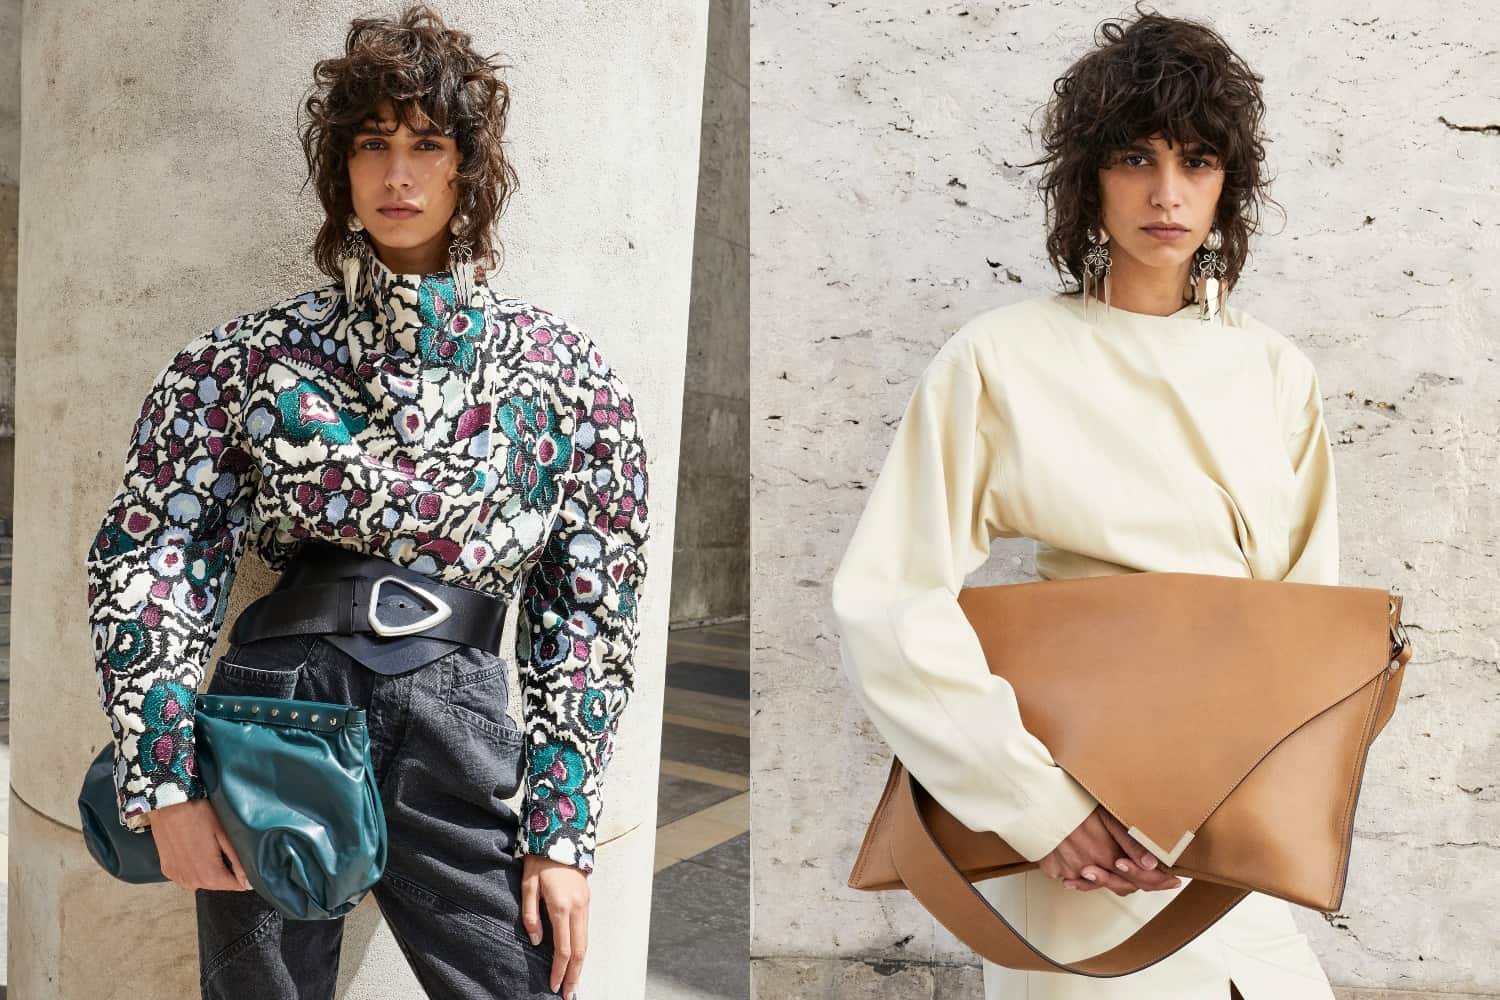 Positiv Fejlfri data Isabel Marant's Latest Campaign is the Fall Style Inspiration You Need